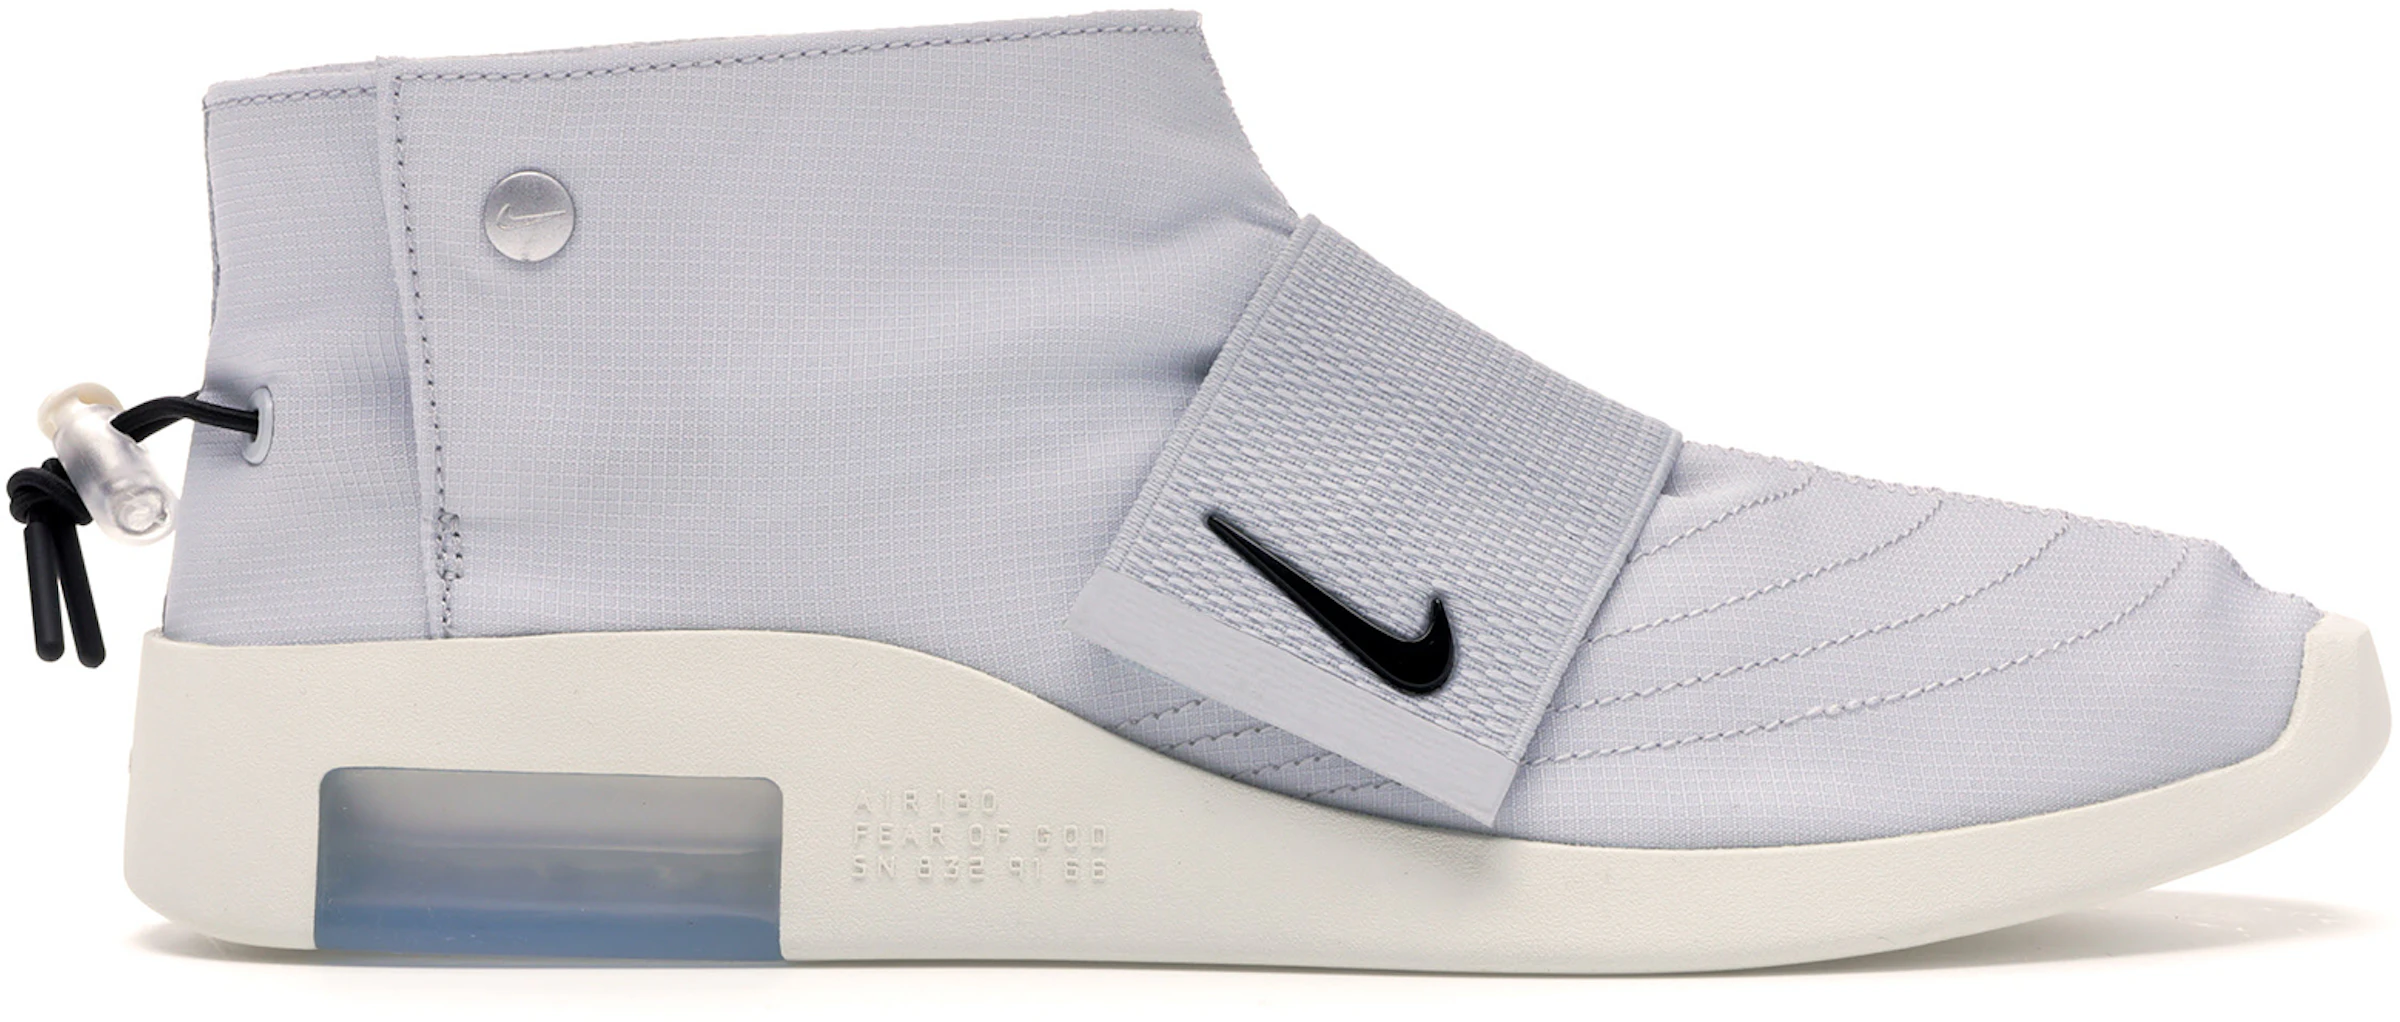 Air Fear Of God Moccasin Platinum - AT8086-001 - US